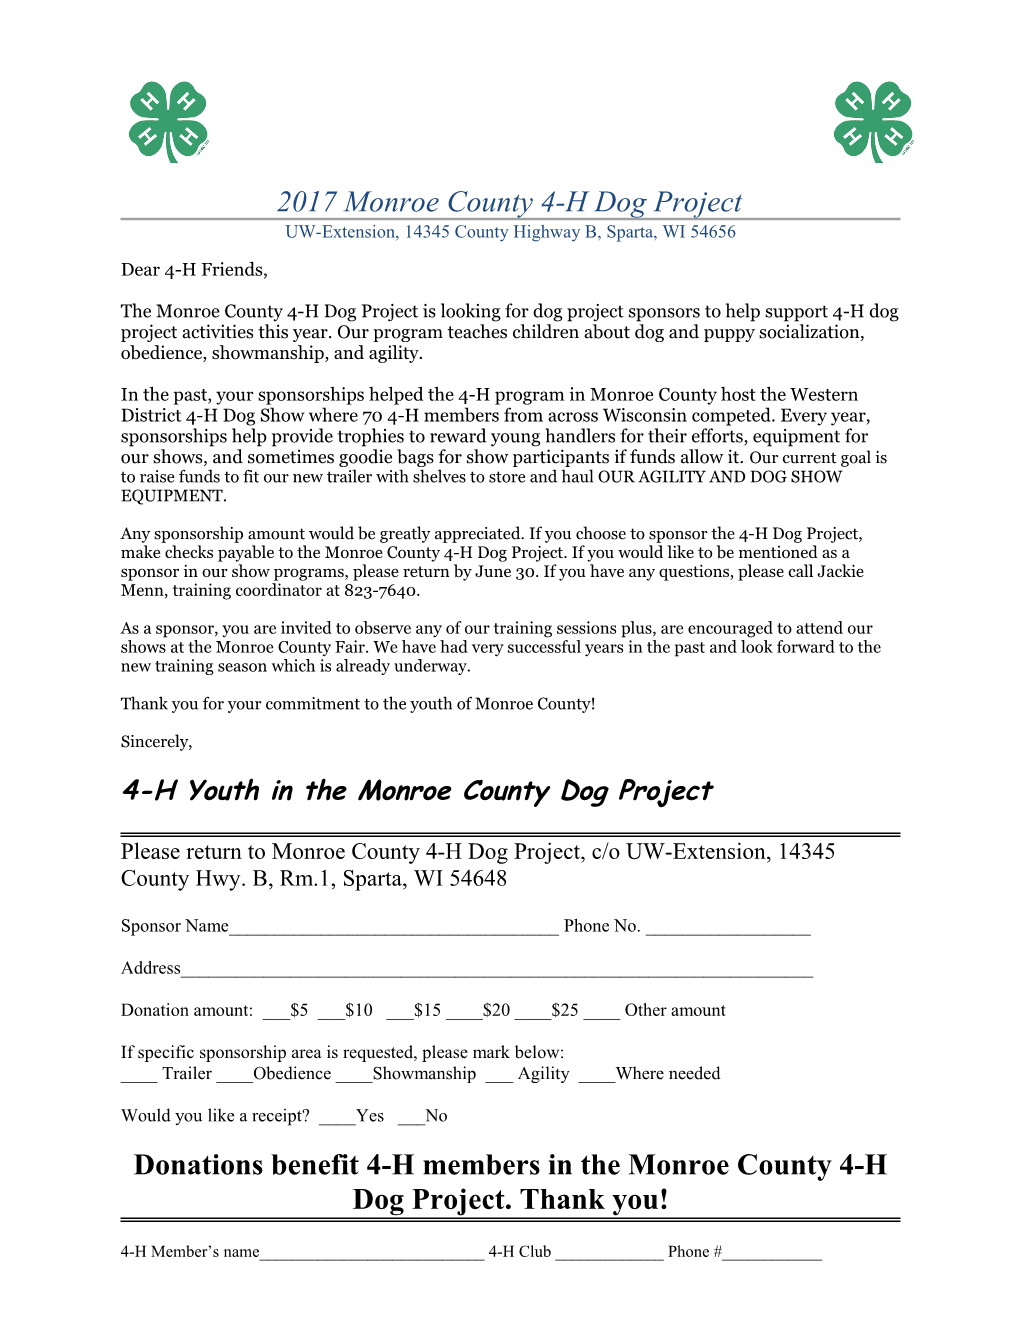 Monroe County 4-H Dog Project